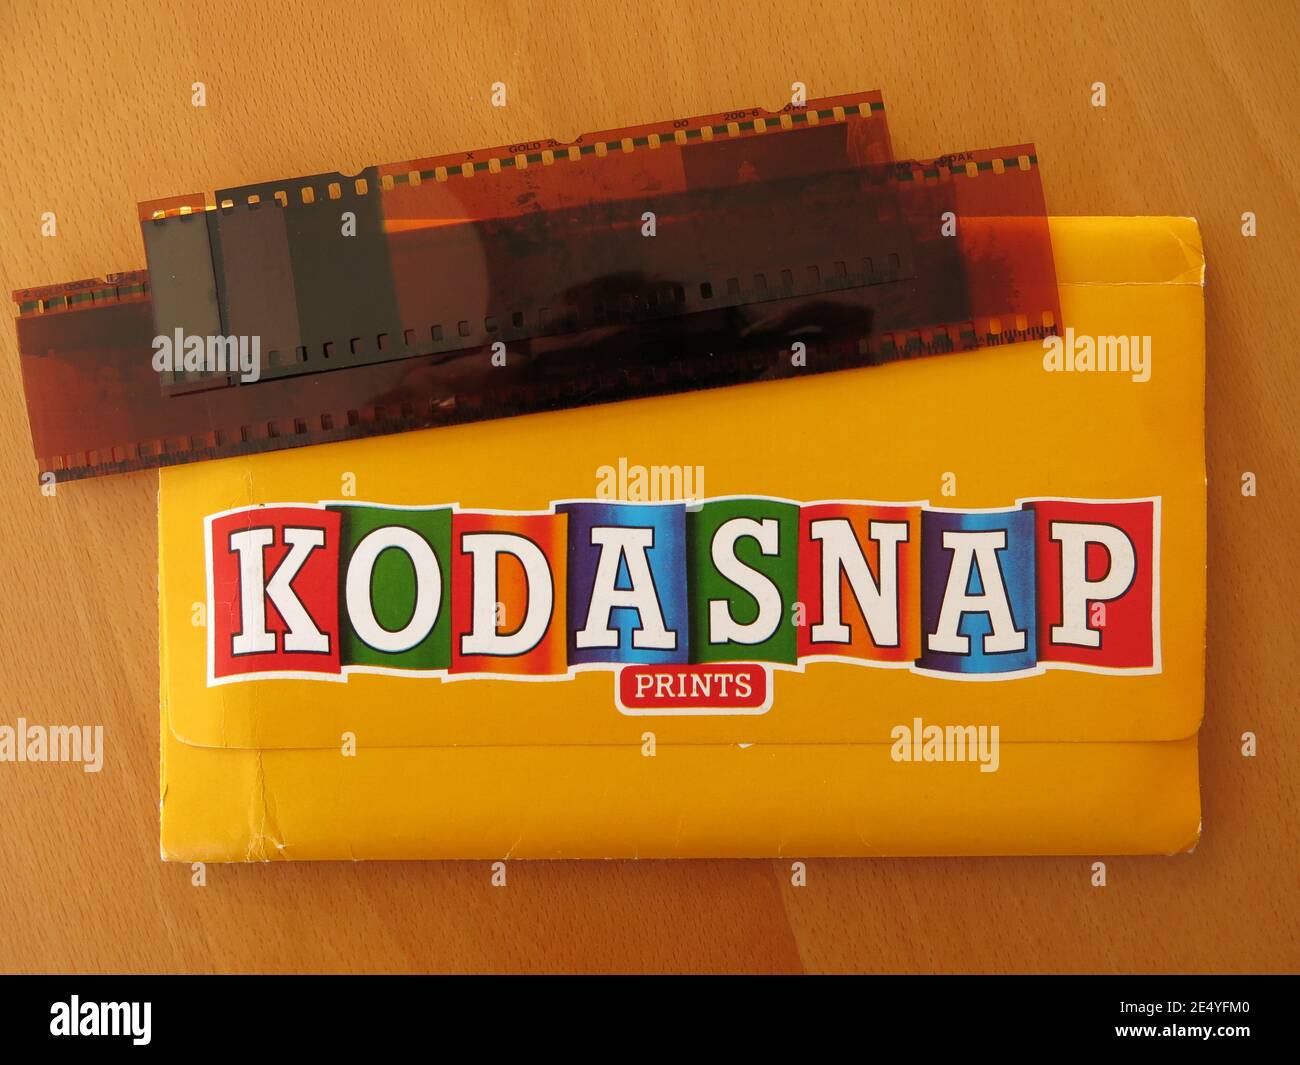 A strip of negatives and yellow photo wallet from Kodasnap, one of the photographic printing companies which offered mail-order film developing. Stock Photo